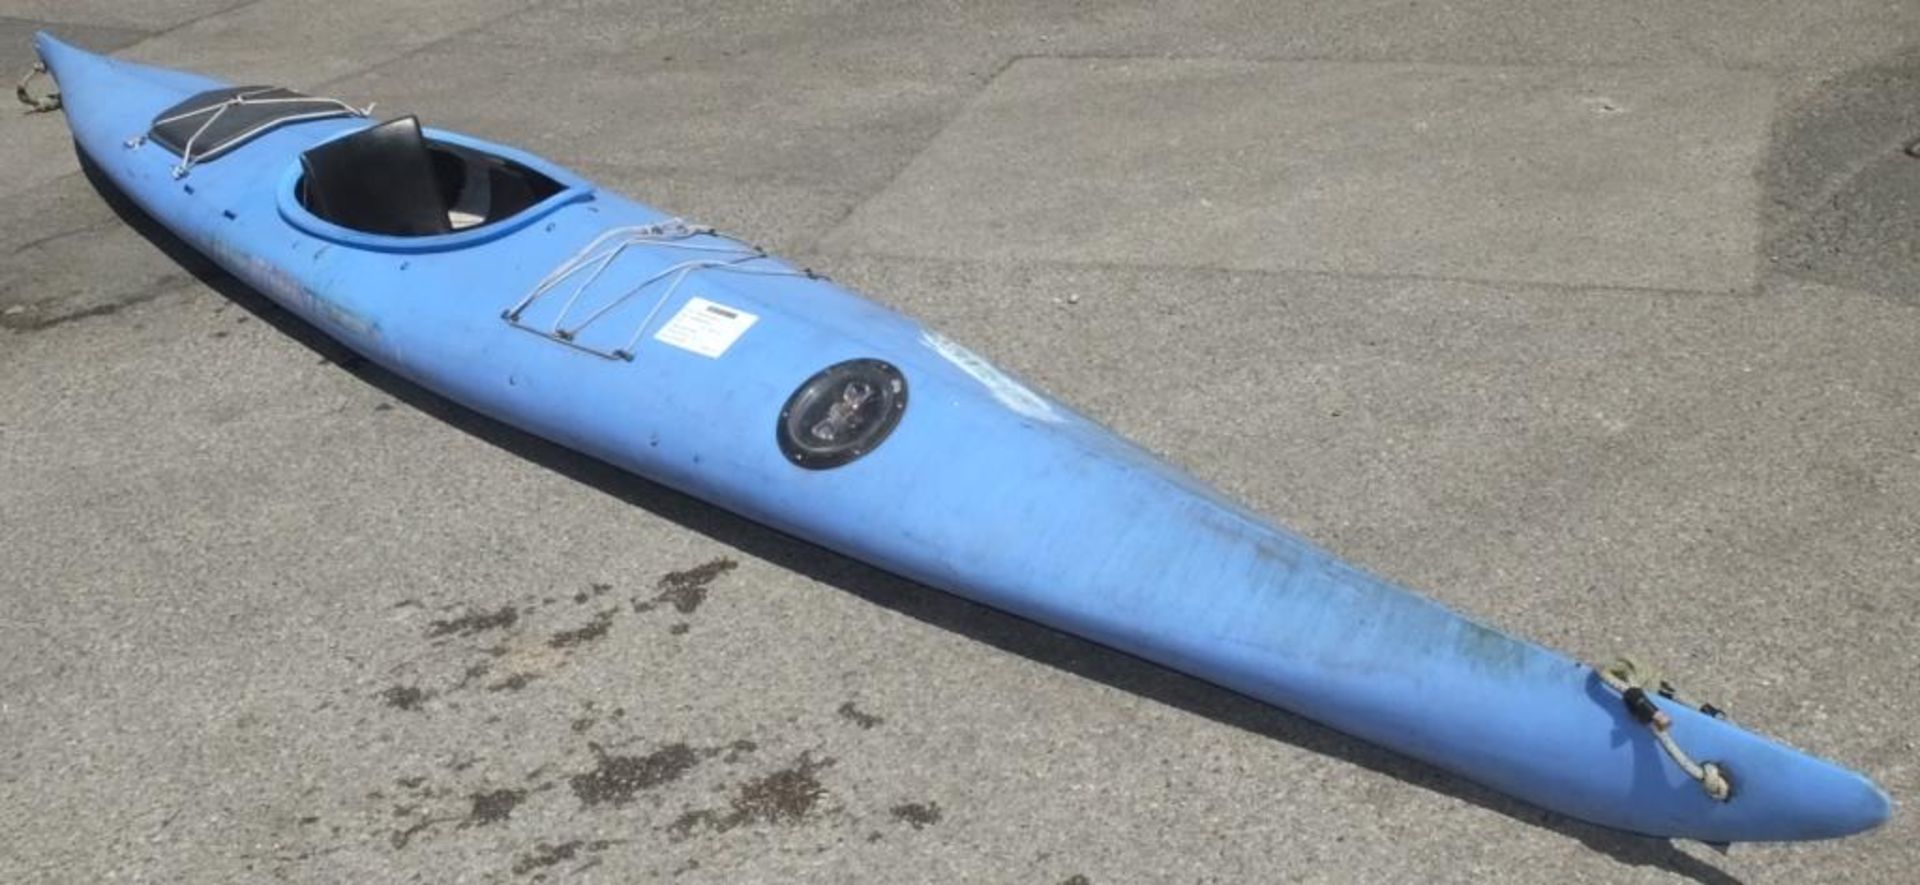 Hydra Sea-Runner Plastic Kayak - paddle NOT included - LOCATED AT OUR CROFT SITE